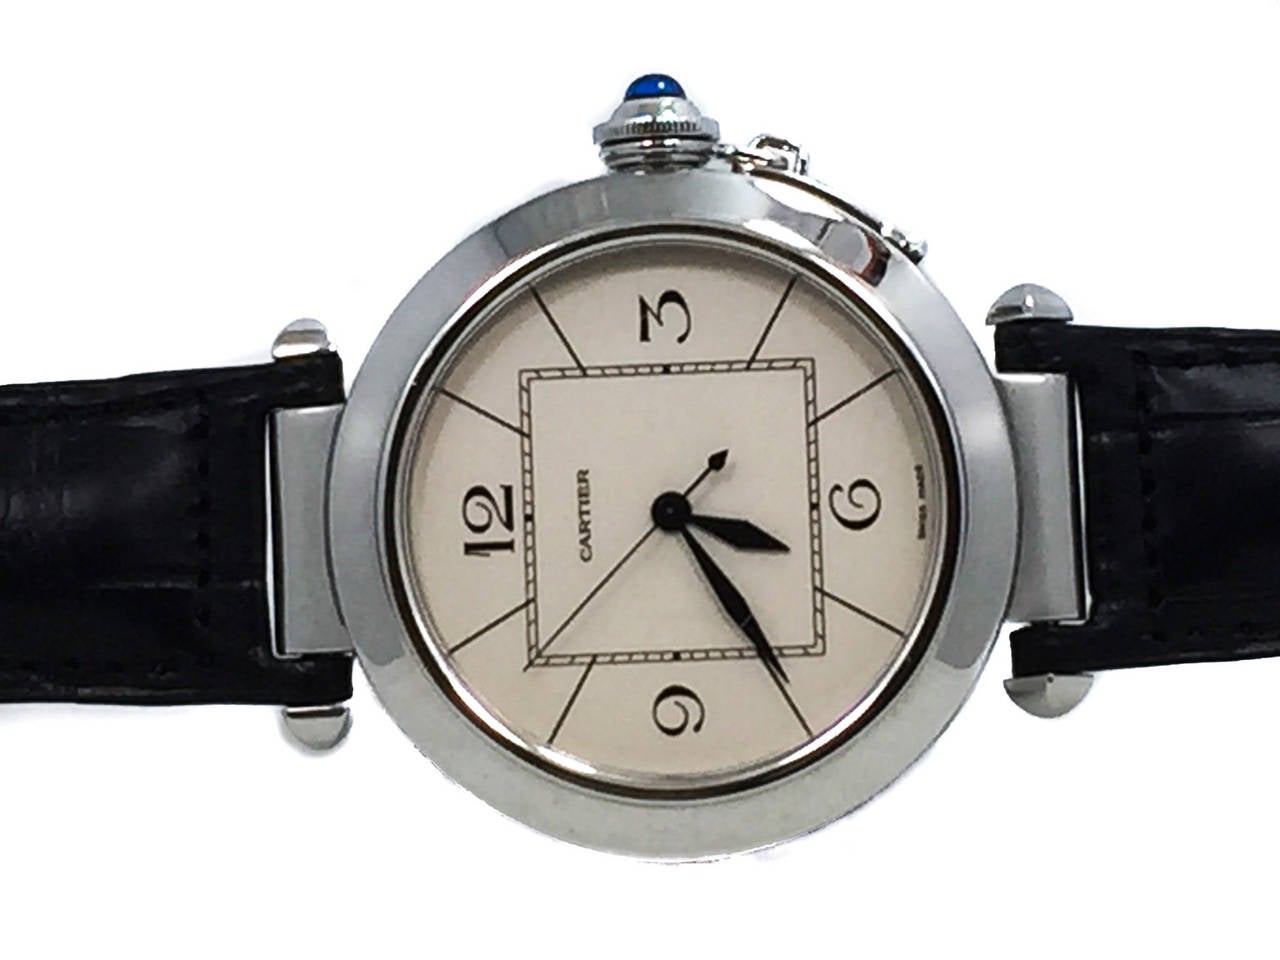 Mens Cartier Pasha 42mm Stainless Steel Watch On Leather Strap, Ref W3107255, Retails $7600. The Watch is in Excellent Condition w/ Some Small Scratches on Crystal. The Watch is Functioning Perfectly, it is Powered by Automatic Mechanical Winding.